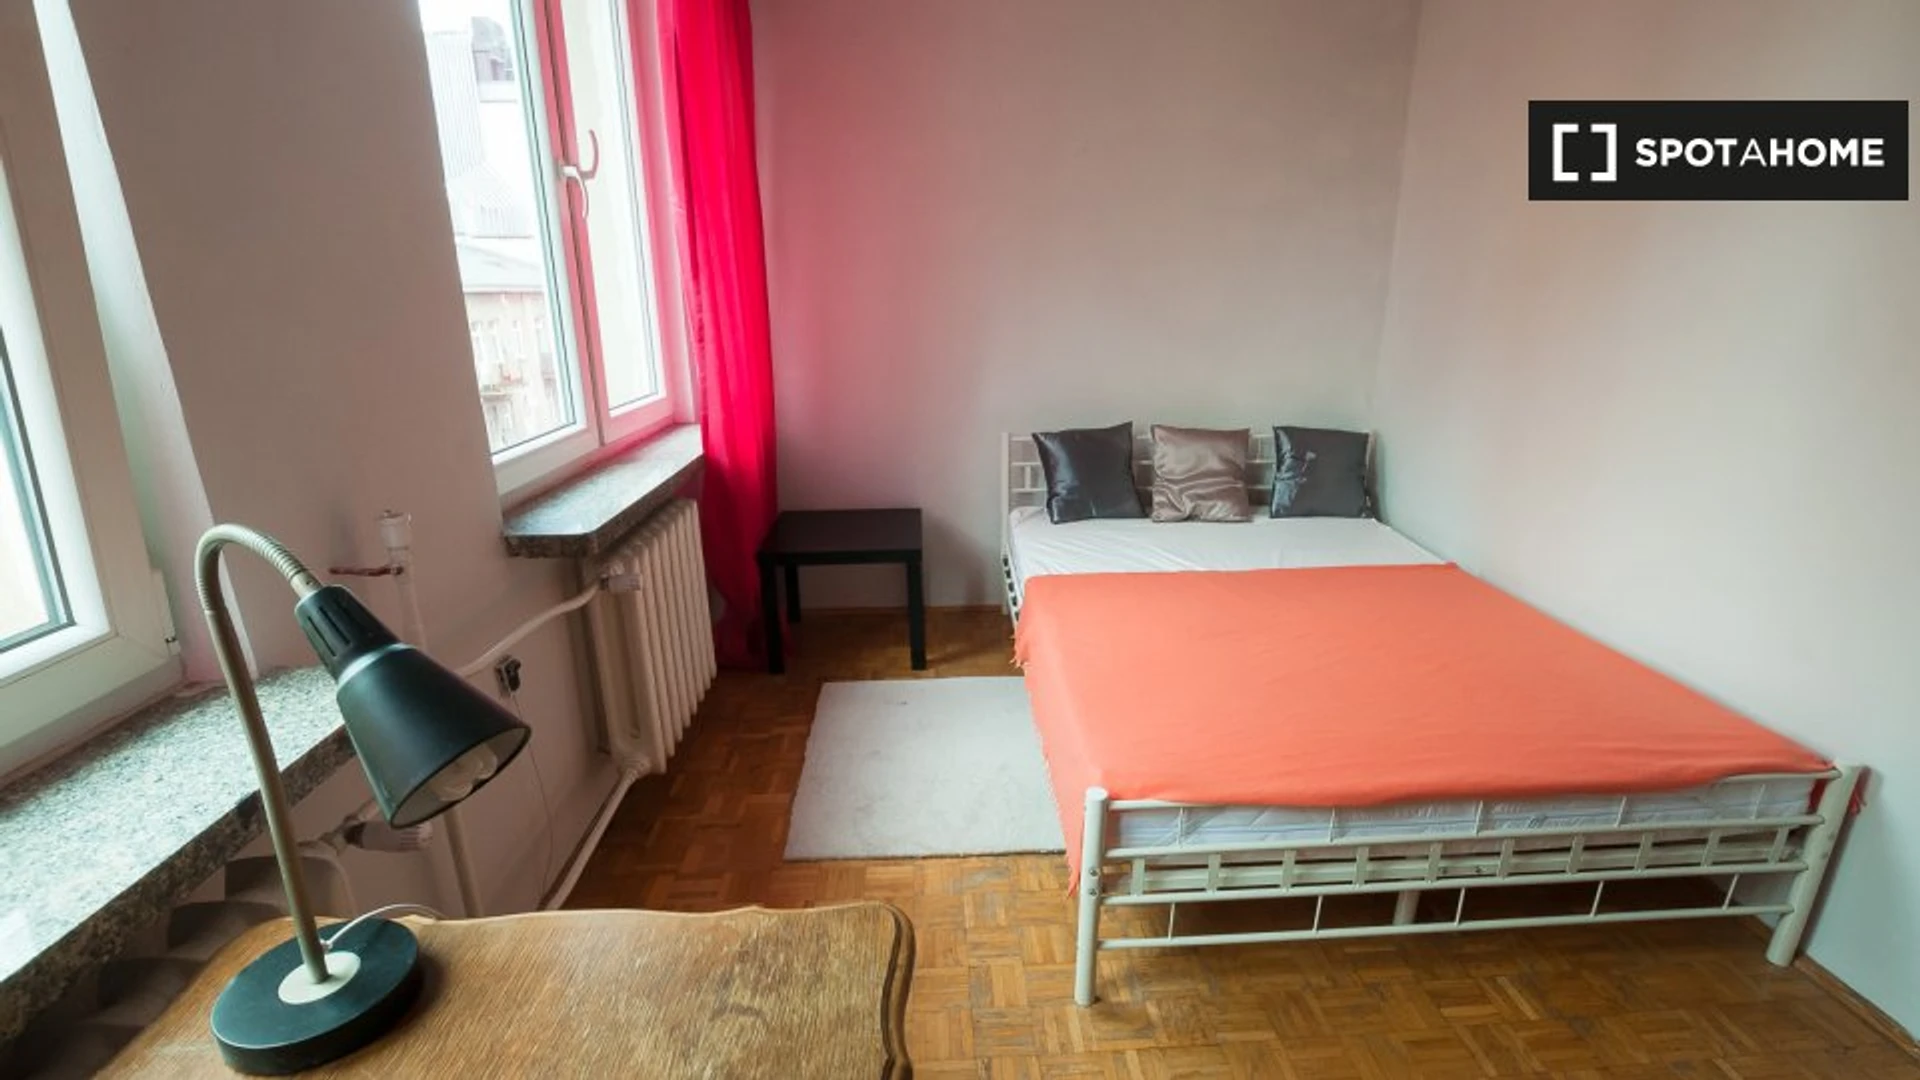 Renting rooms by the month in Warsaw